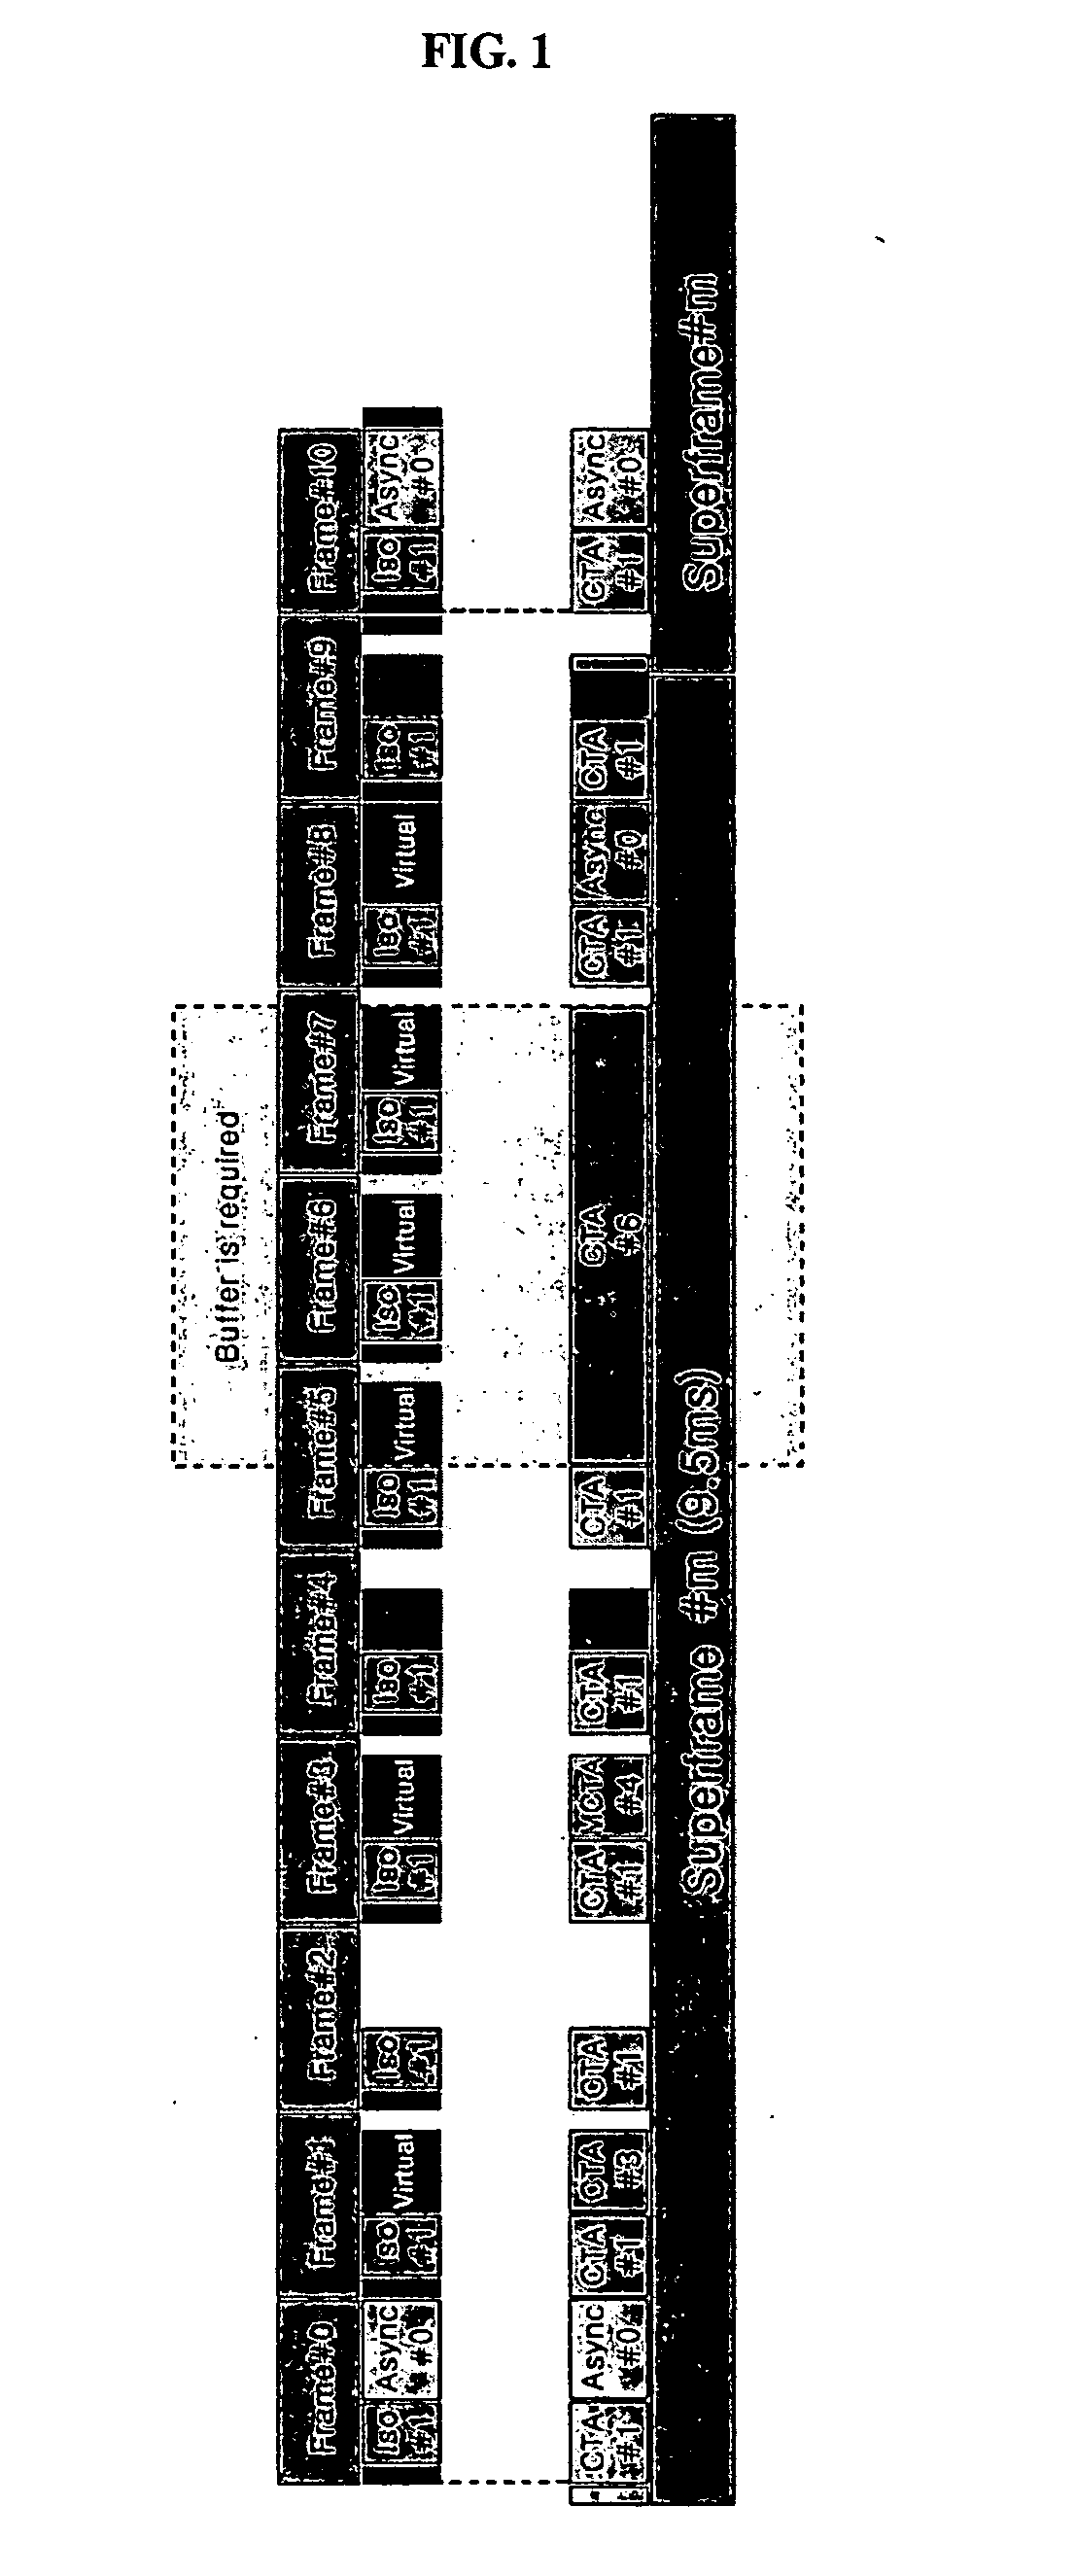 Apparatus and method for allocating channel time to applications in wireless PAN